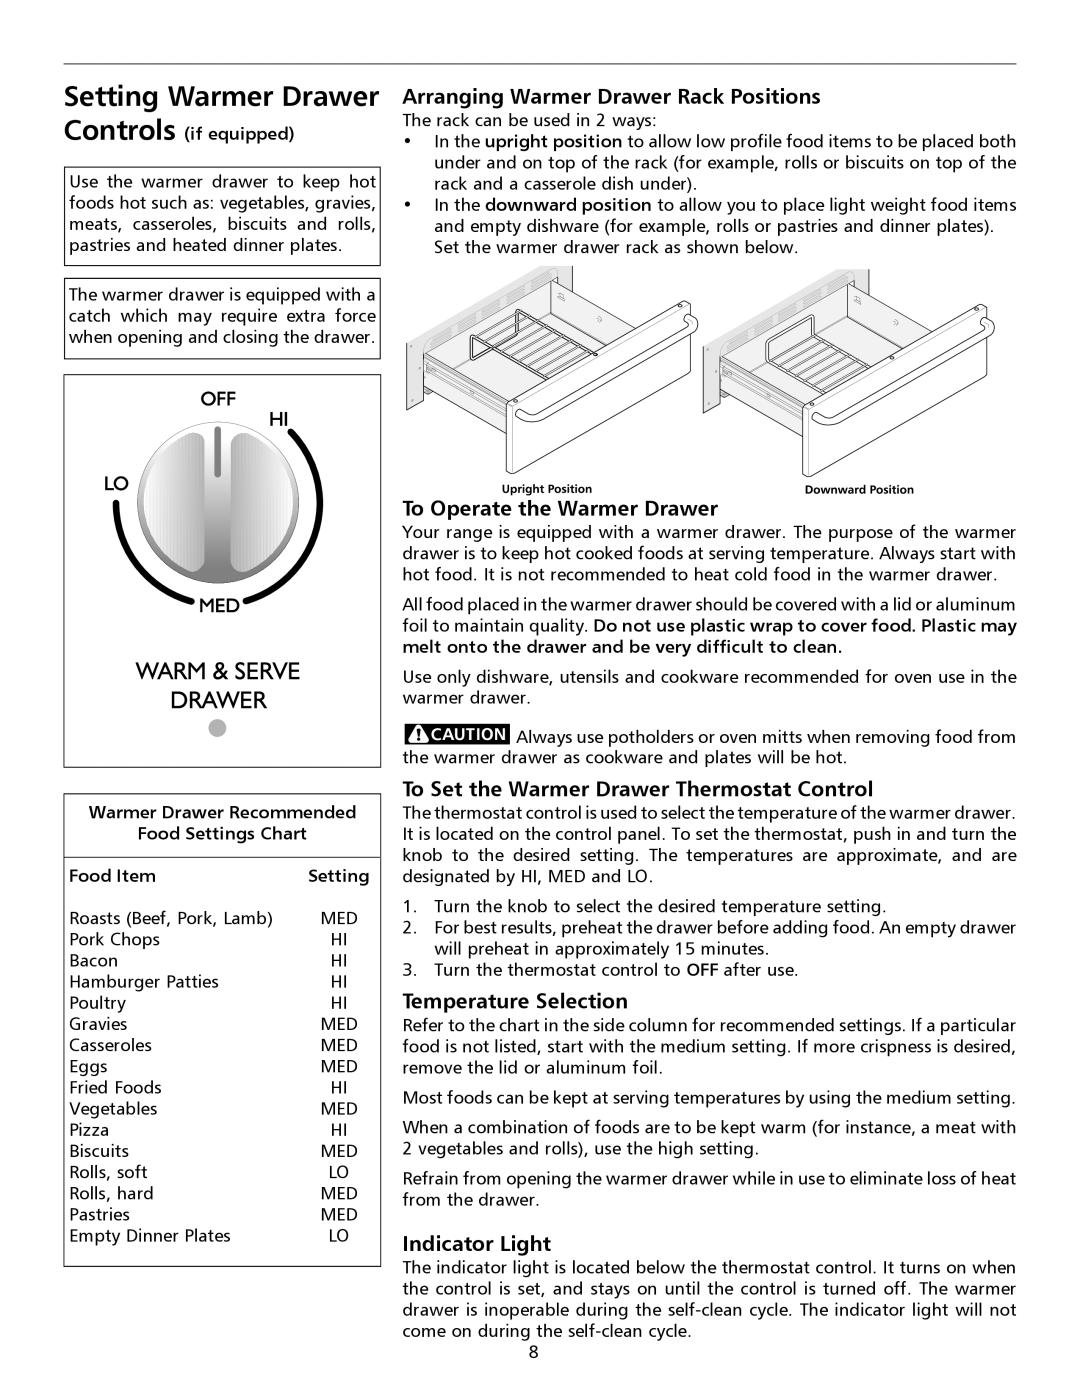 Frigidaire pmn Setting Warmer Drawer, Arranging Warmer Drawer Rack Positions, To Operate the Warmer Drawer, Food Item 